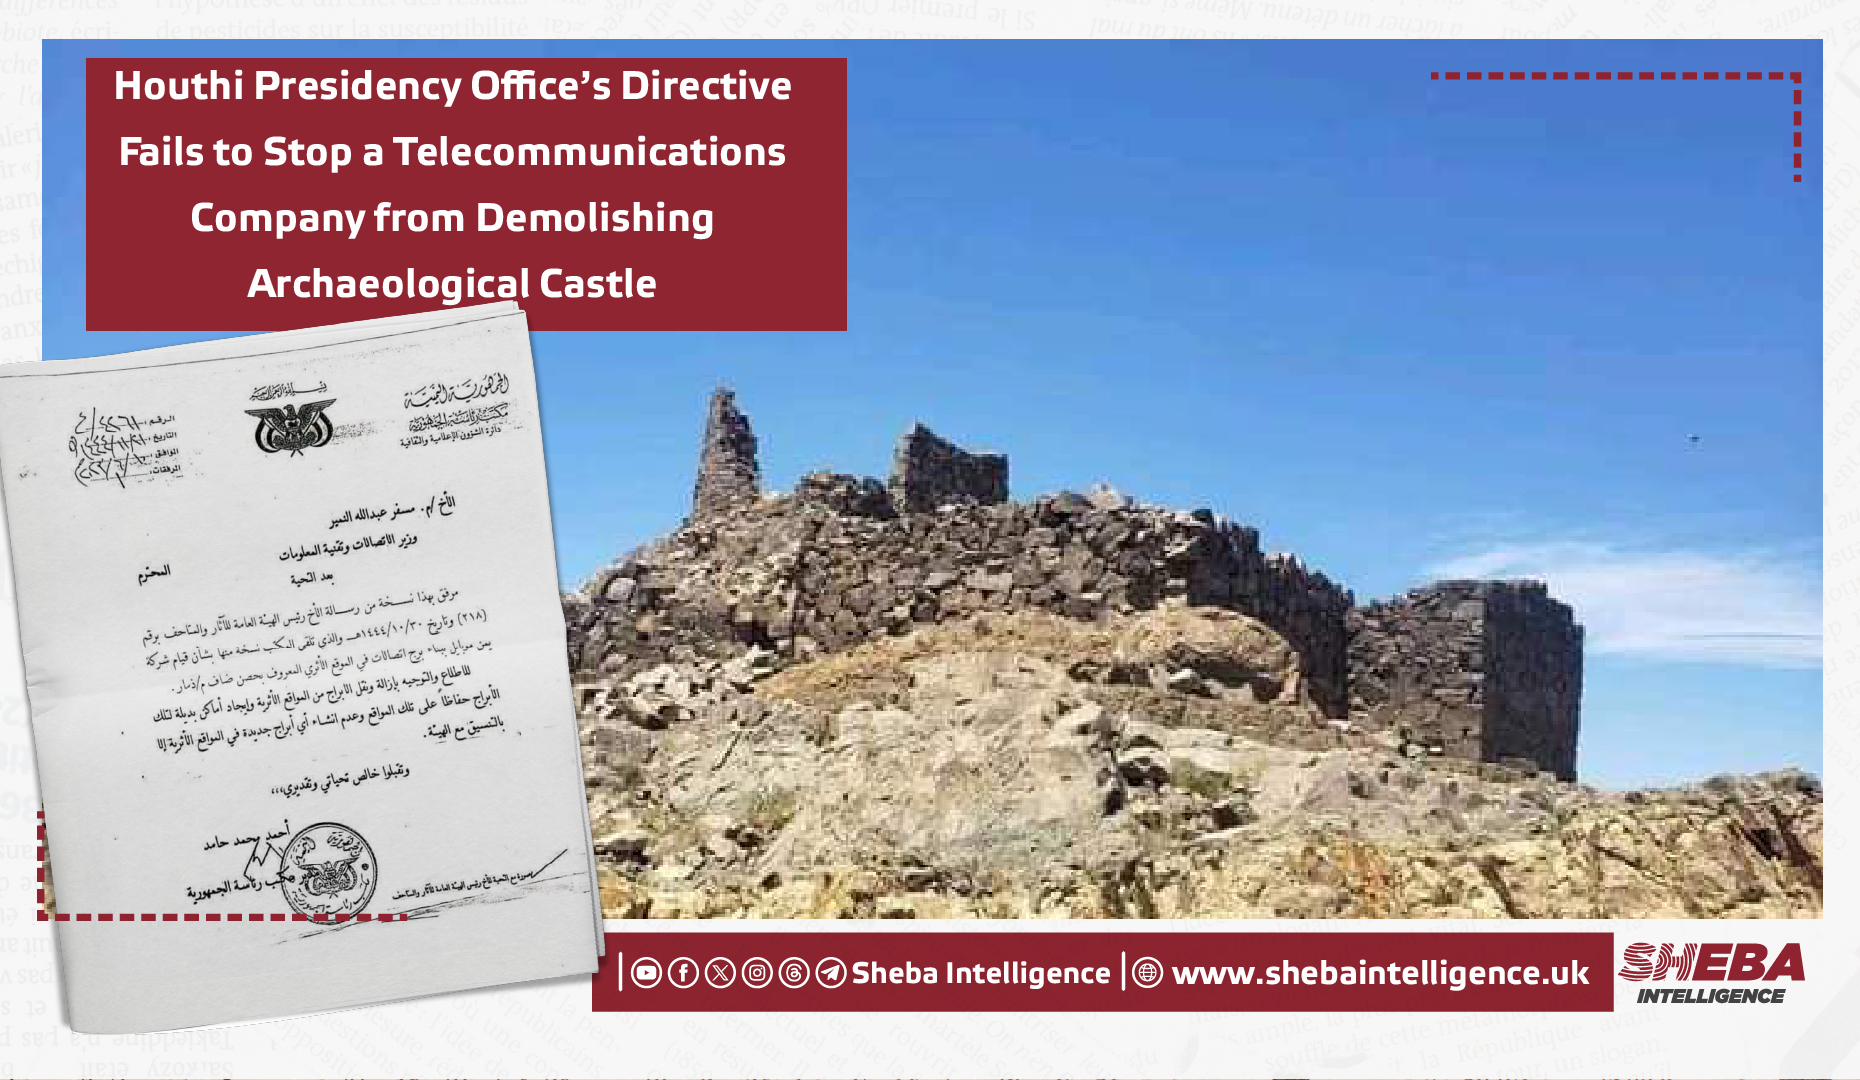 Houthi Presidency Office's Directive Fails to Stop a Telecommunications Company from Demolishing Archaeological Castle